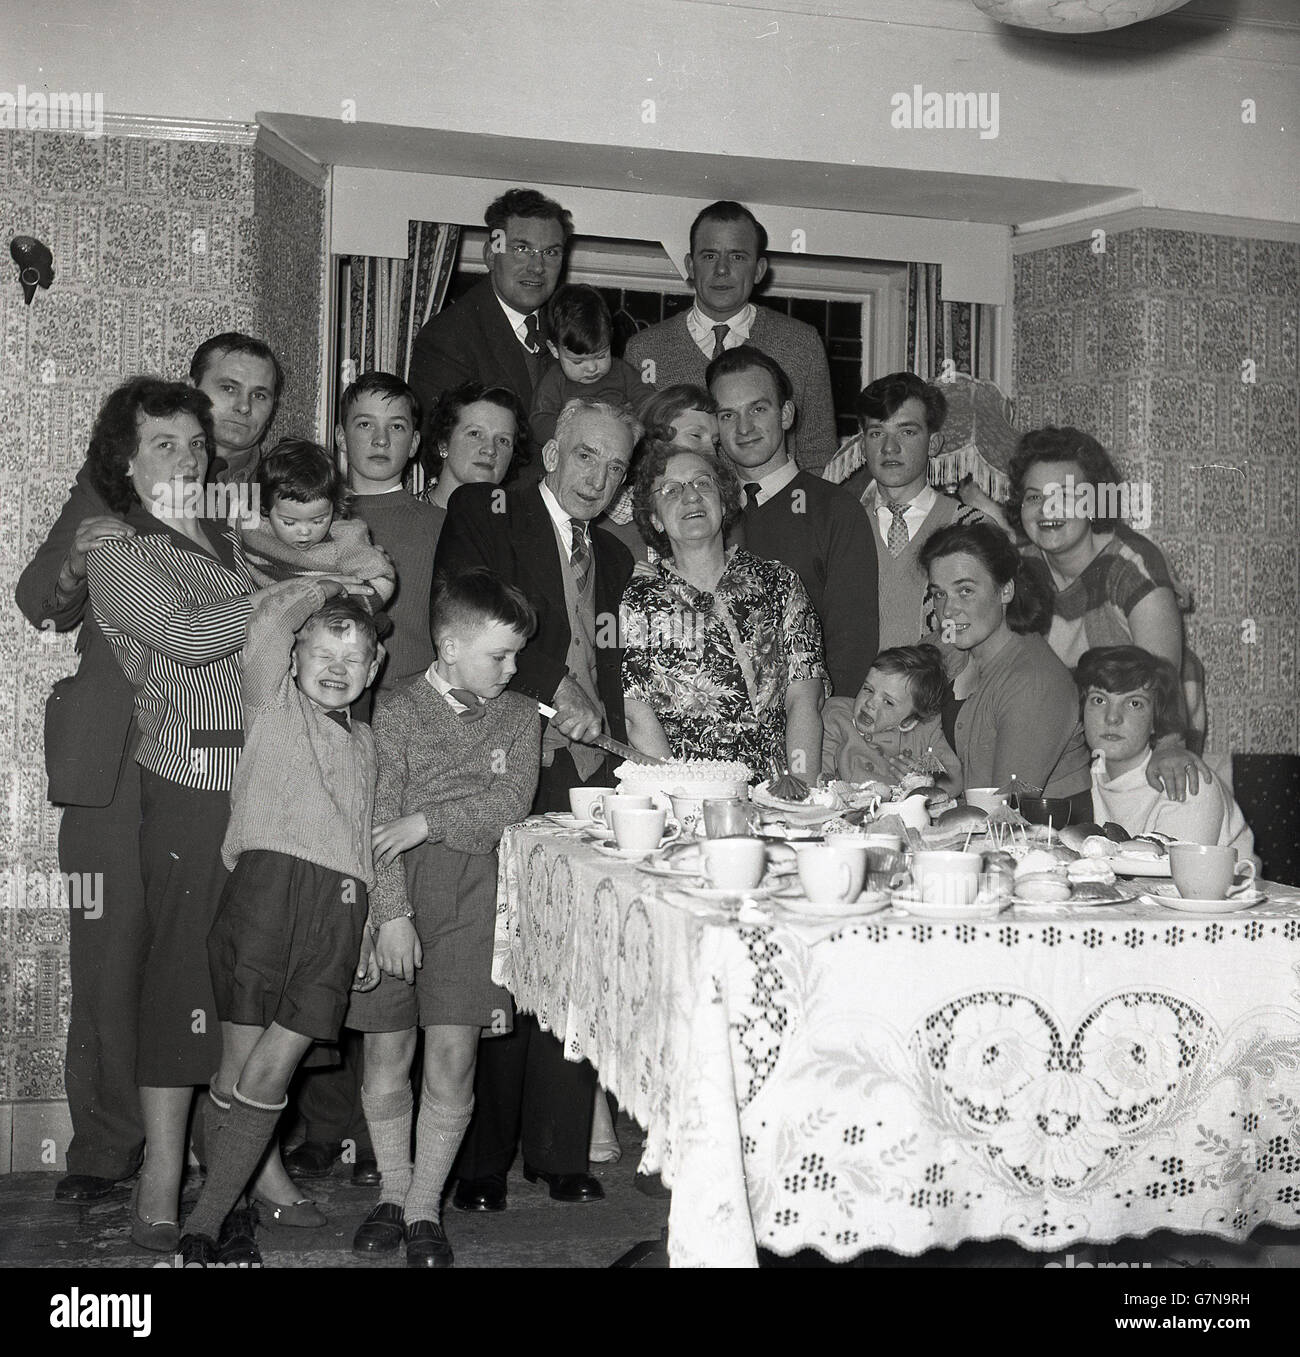 1950s, historical picture, a whole family generation celebrate a grandparents wedding anniversary as they cut the cake. Stock Photo